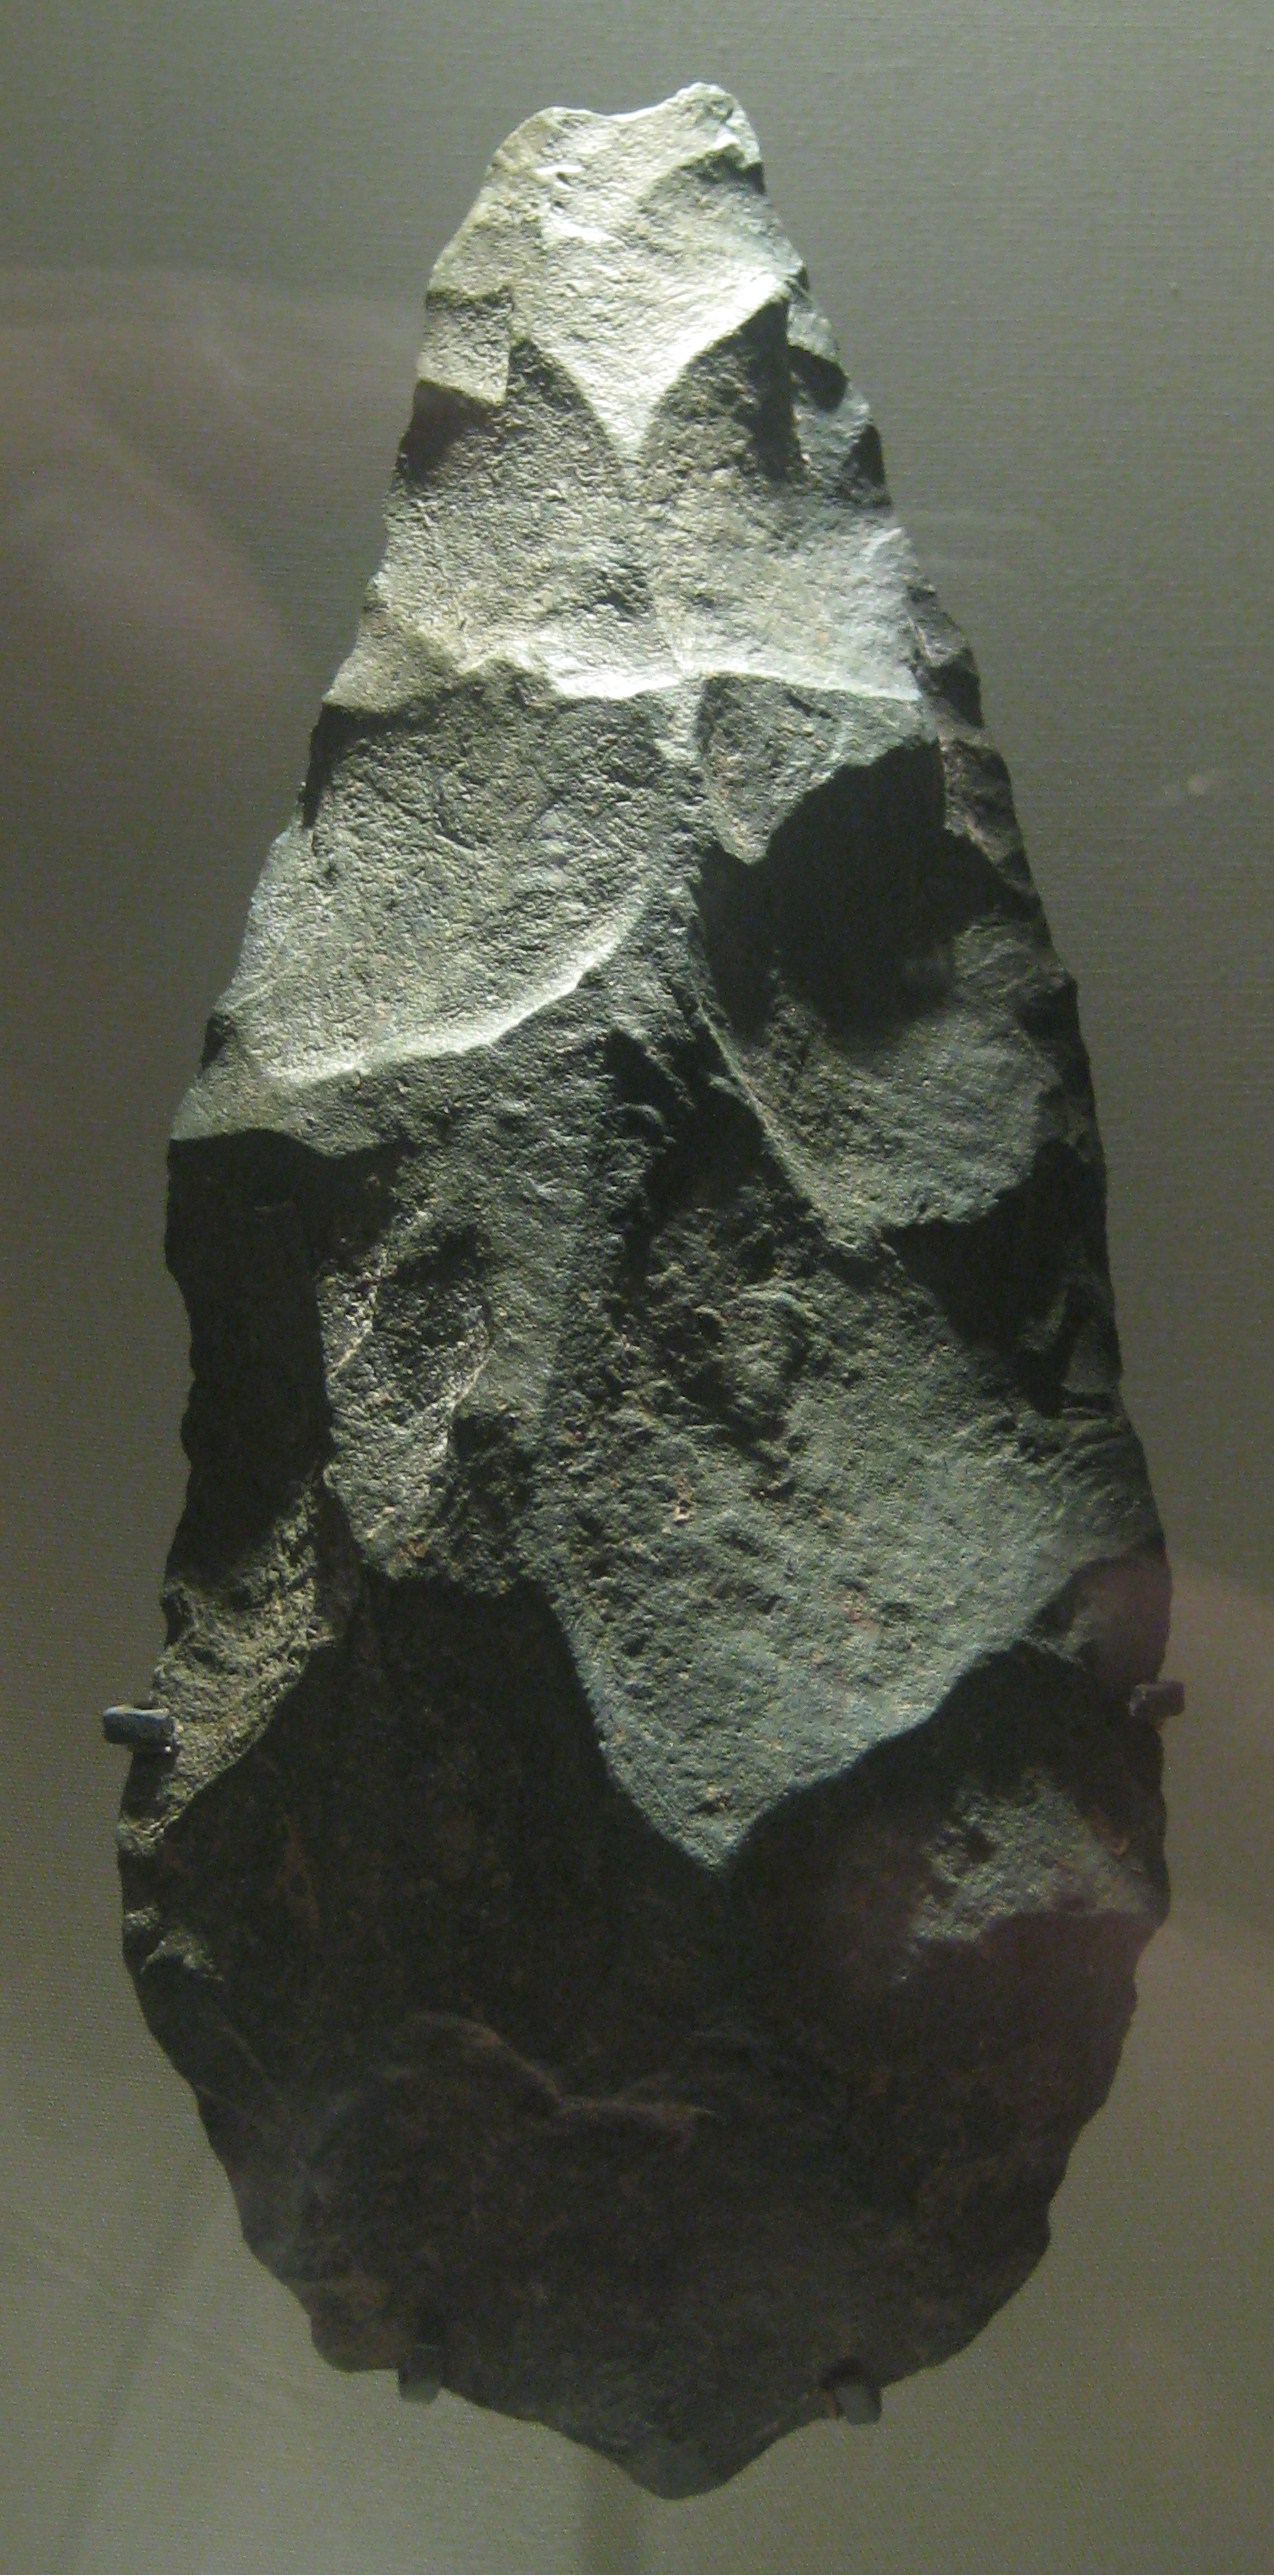 Image: A handaxe from Olduvai which is around 1.2 million years old.